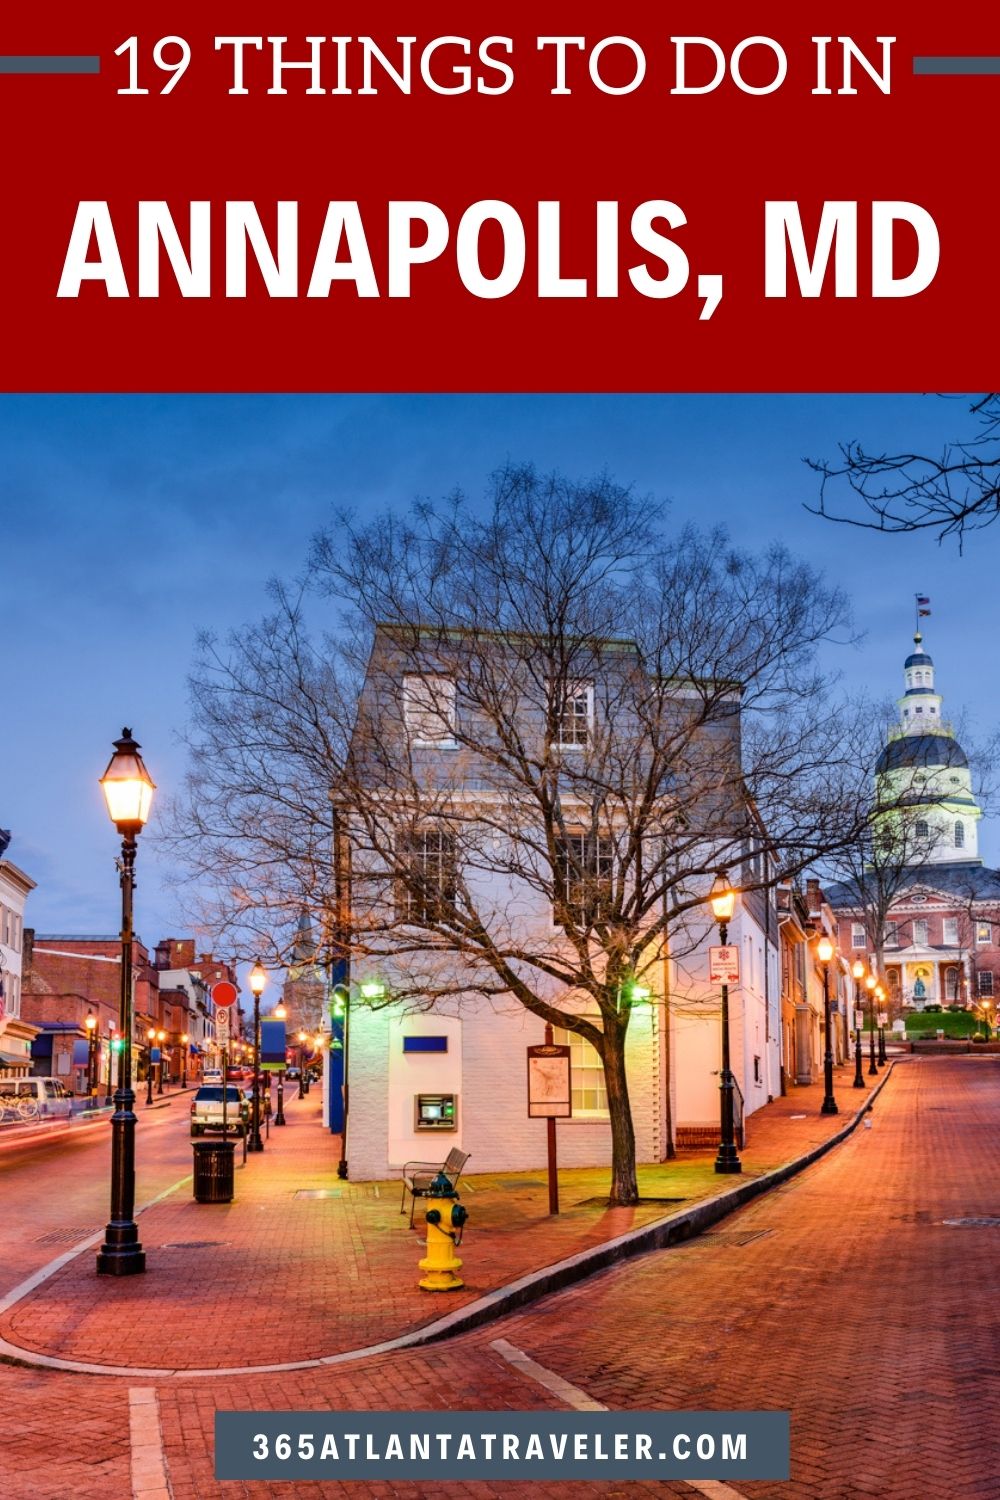 19 THINGS TO DO IN ANNAPOLIS, MD YOU CAN'T MISS